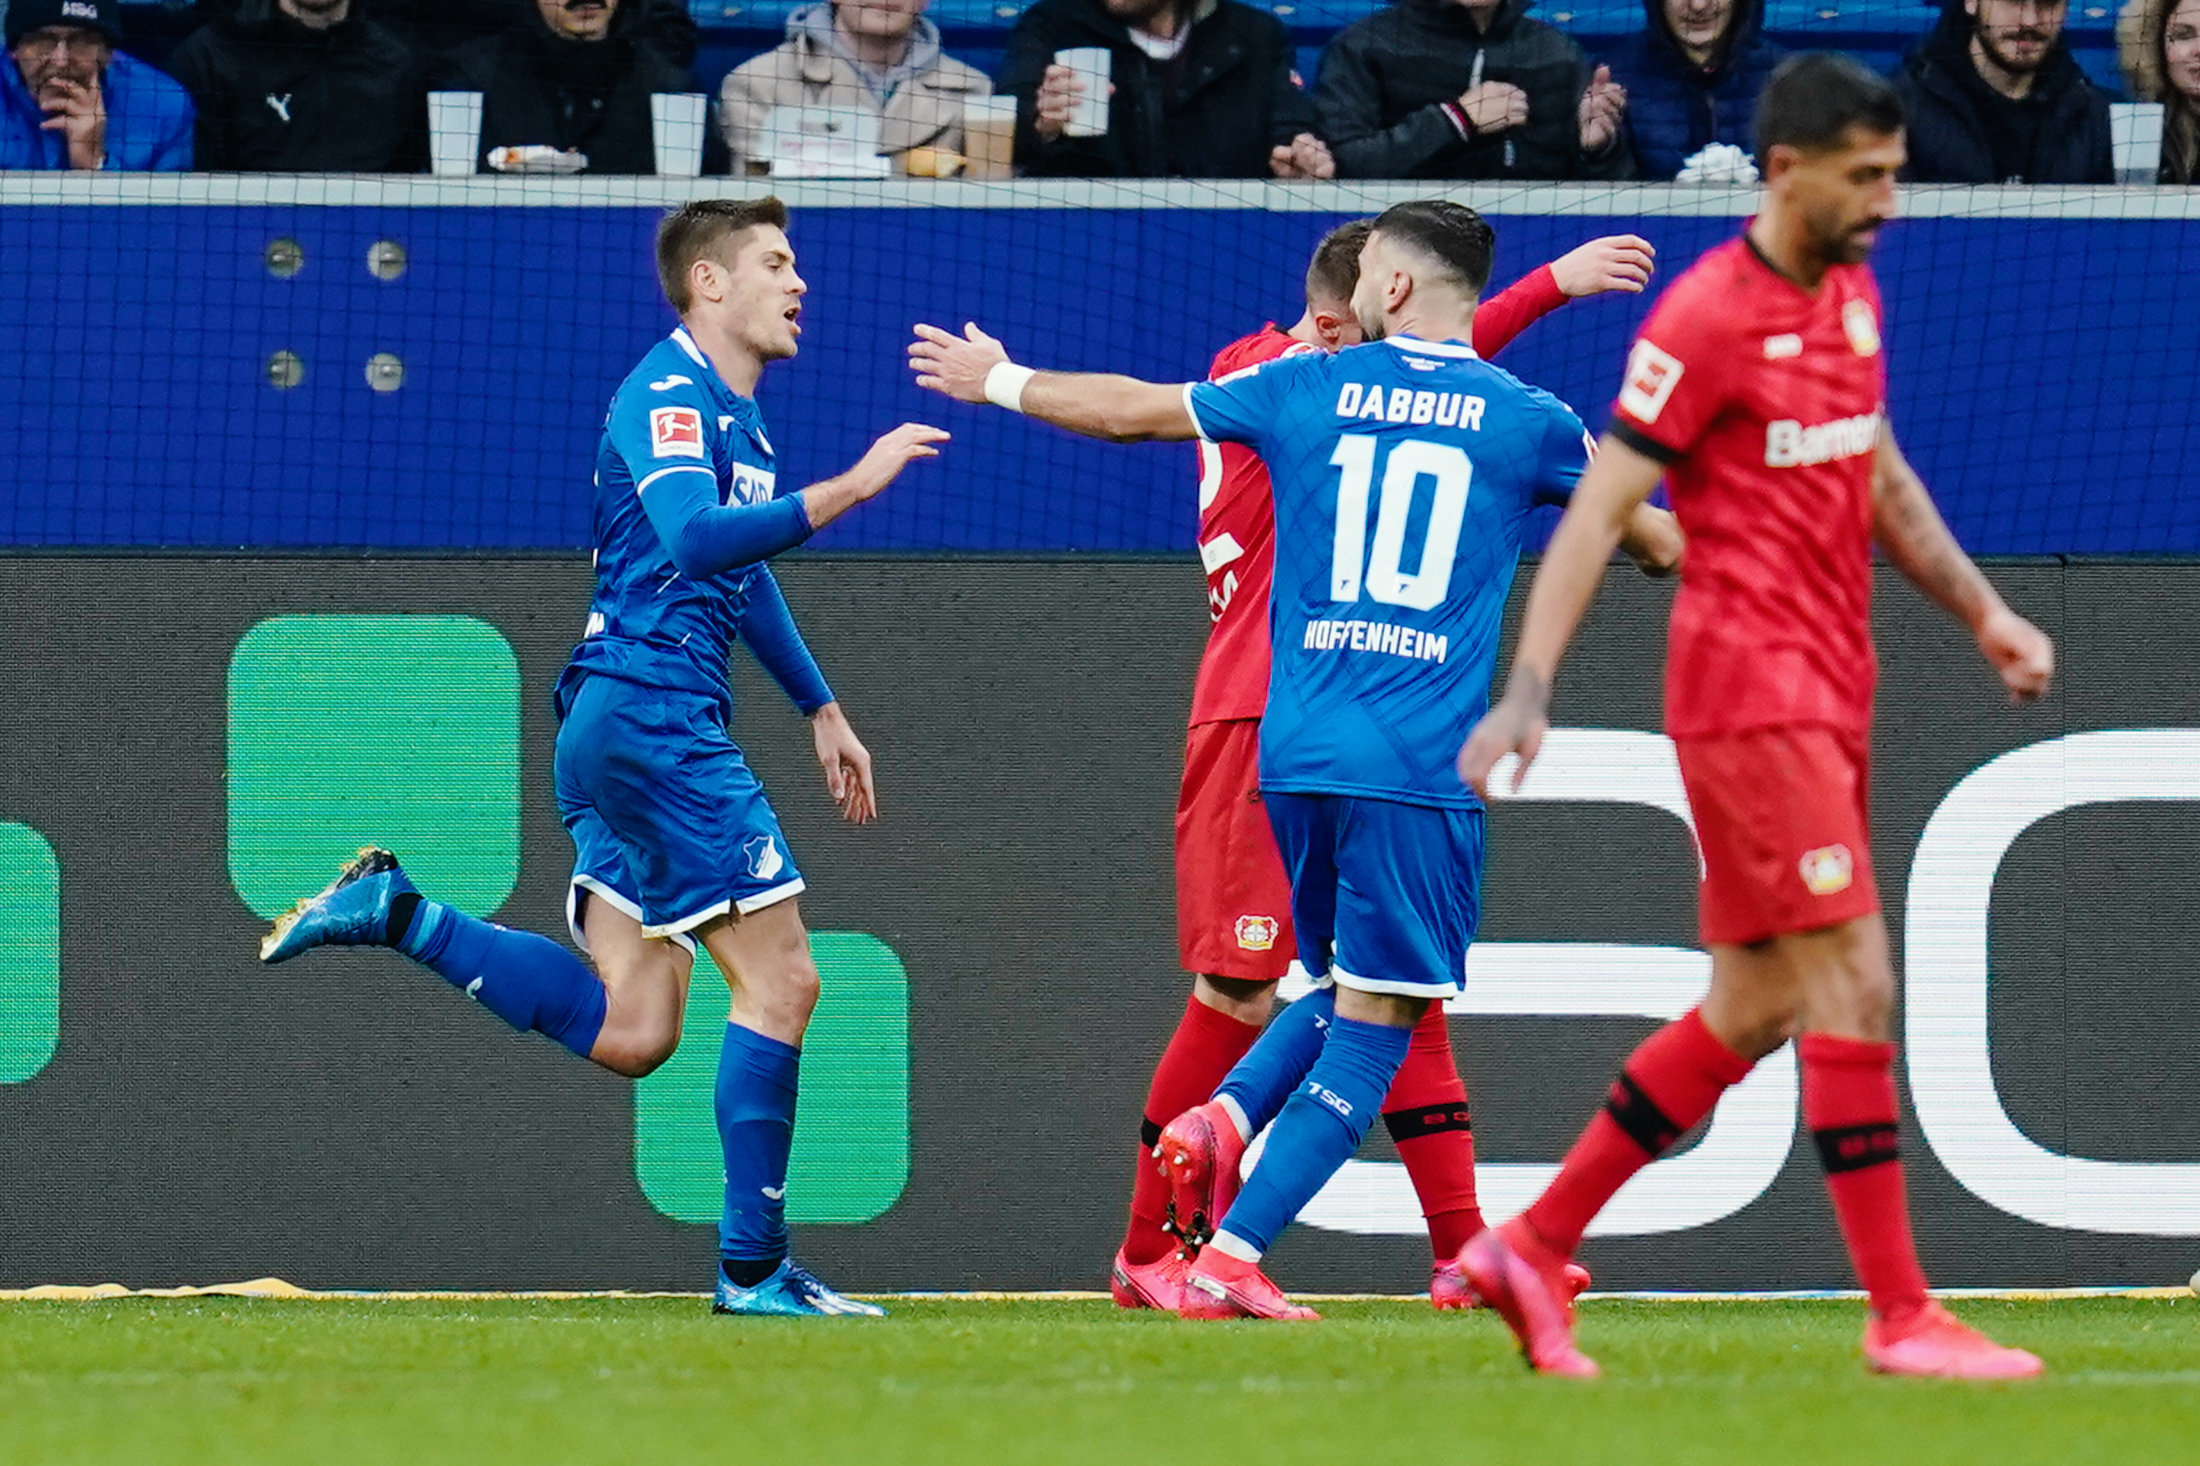 01 February 2020, Baden-Wuerttemberg, Sinsheim: Hoffenheim's Andrej Kramaric (L) celebrates scoring his side's first goal with team mate Munas Dabbur during the German Bundesliga soccer match between TSG 1899 Hoffenheim and Bayer 04 Leverkusen at Rhein-Neckar-Arena. Photo: Uwe Anspach/dpa - IMPORTANT NOTICE: DFL and DFB regulations prohibit any use of photographs as image sequences and/or quasi-video.